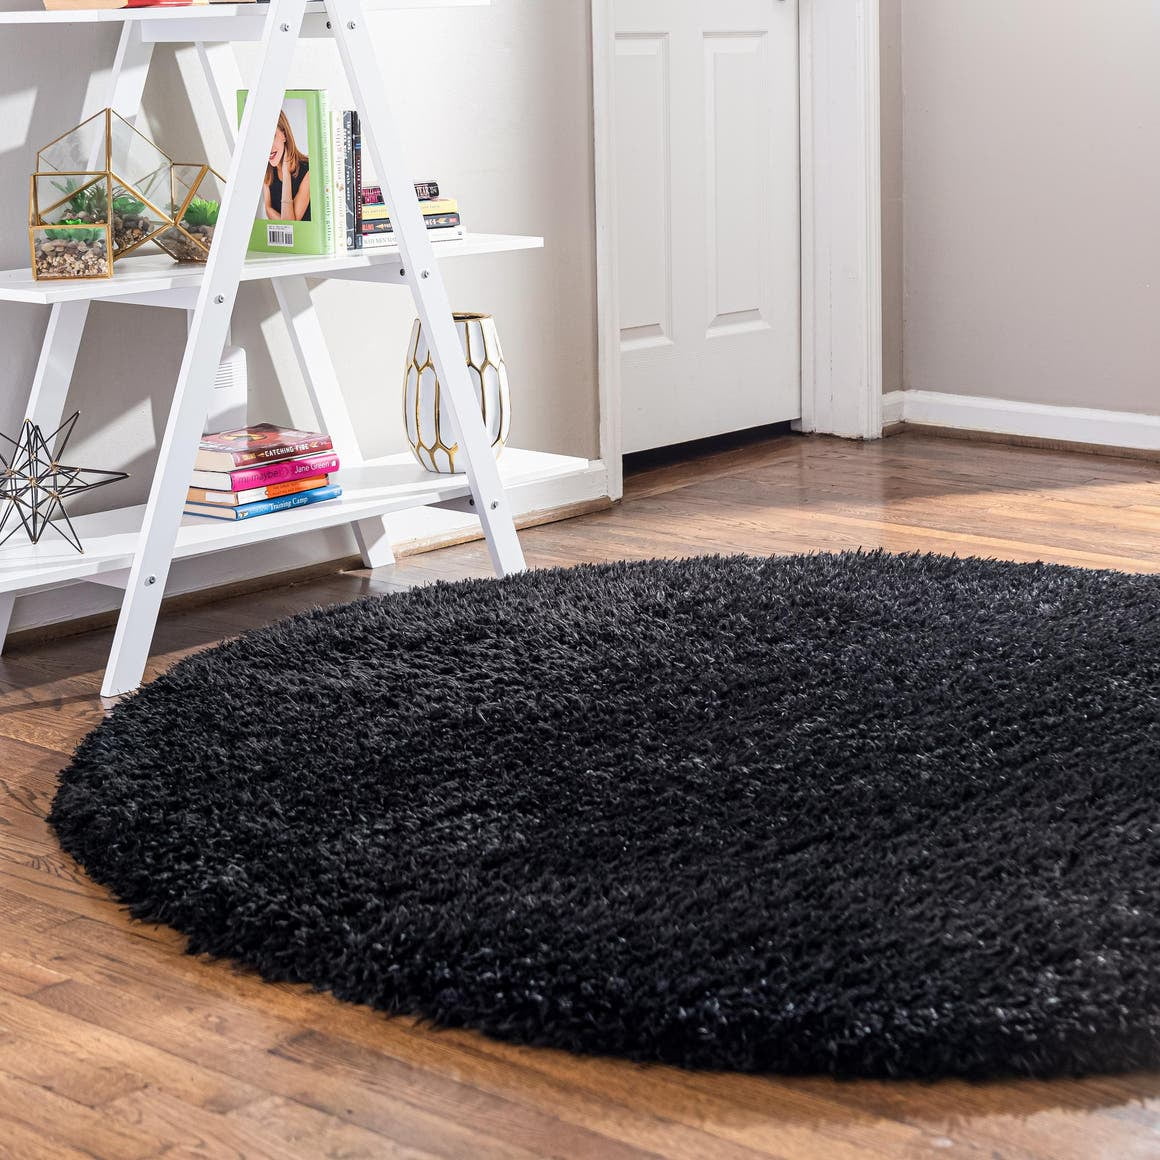 Better Bathrooms CHEAP RUGS ROUND SHAGGY 5cm BLACK HIGH QUALITY nice in touch CARPETS MANY SIZE 